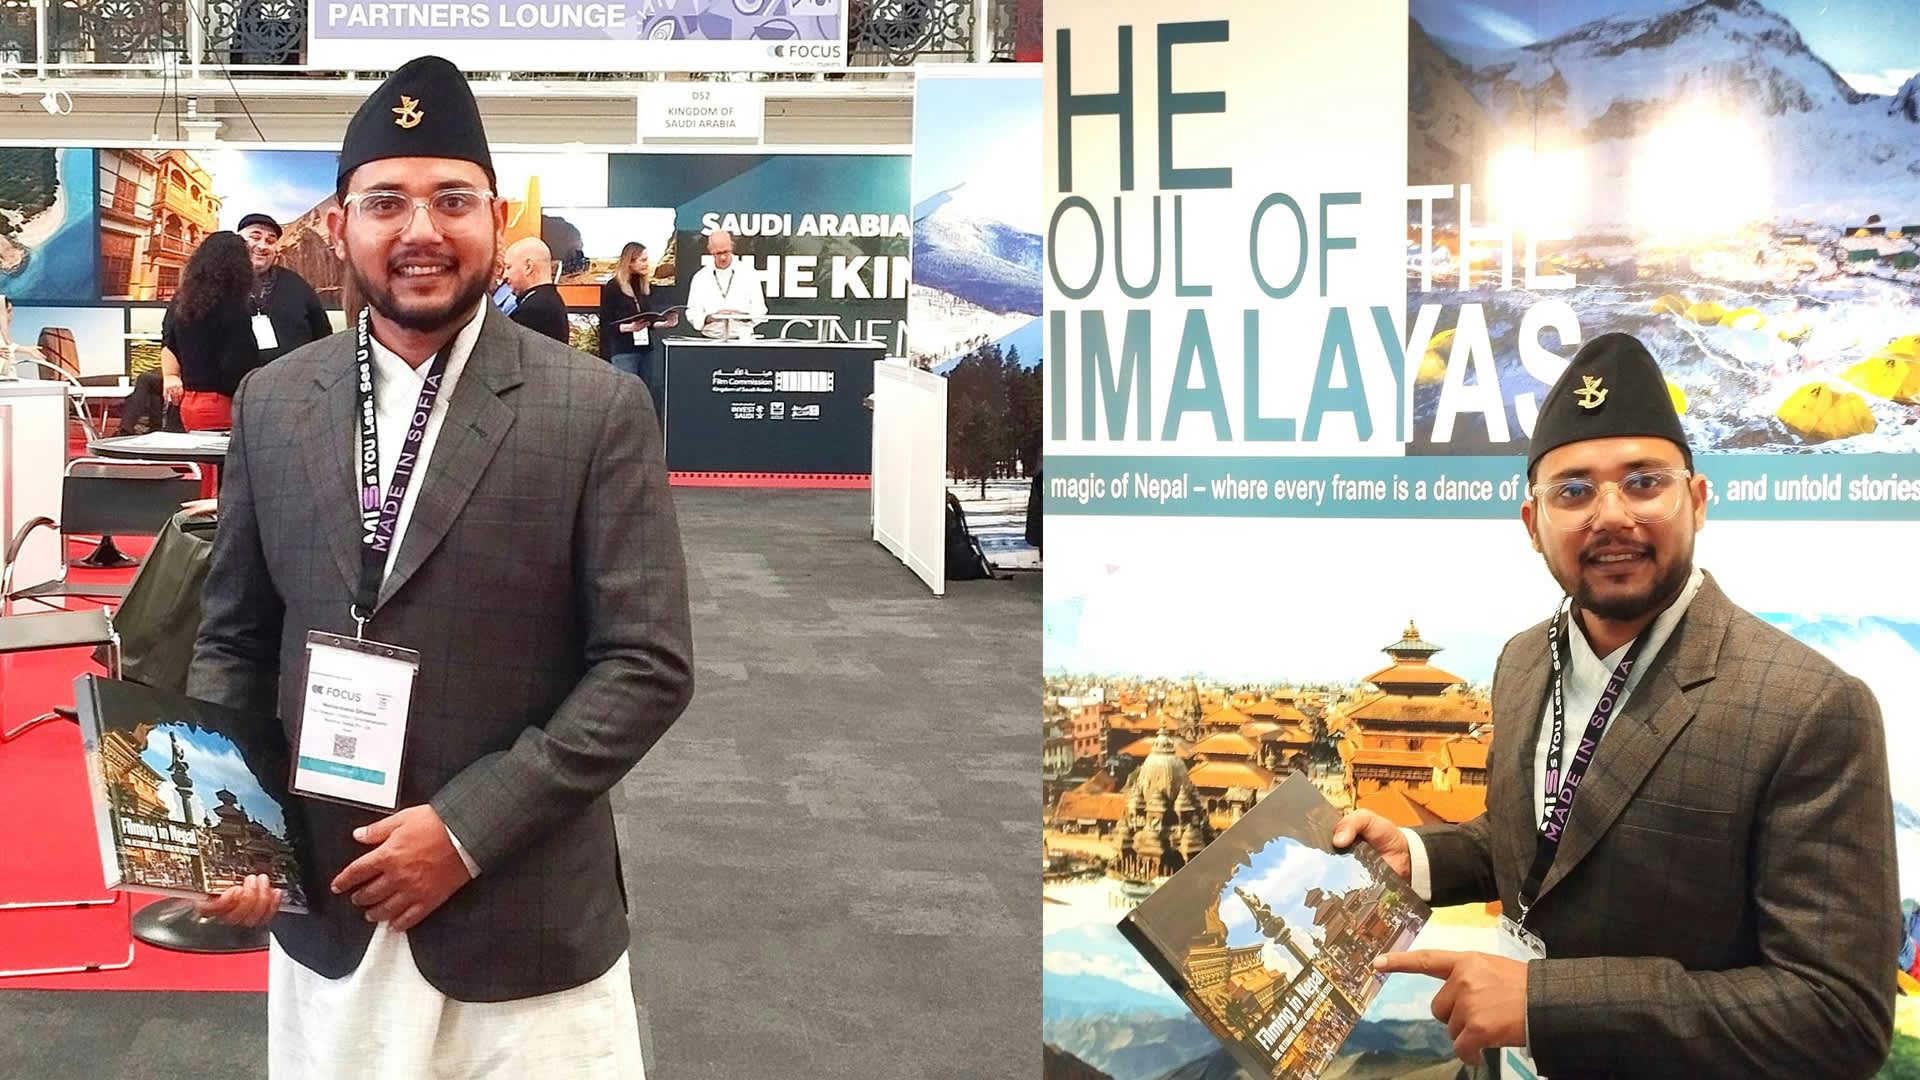 The director Ghimire is promoting Nepal as a filming location.